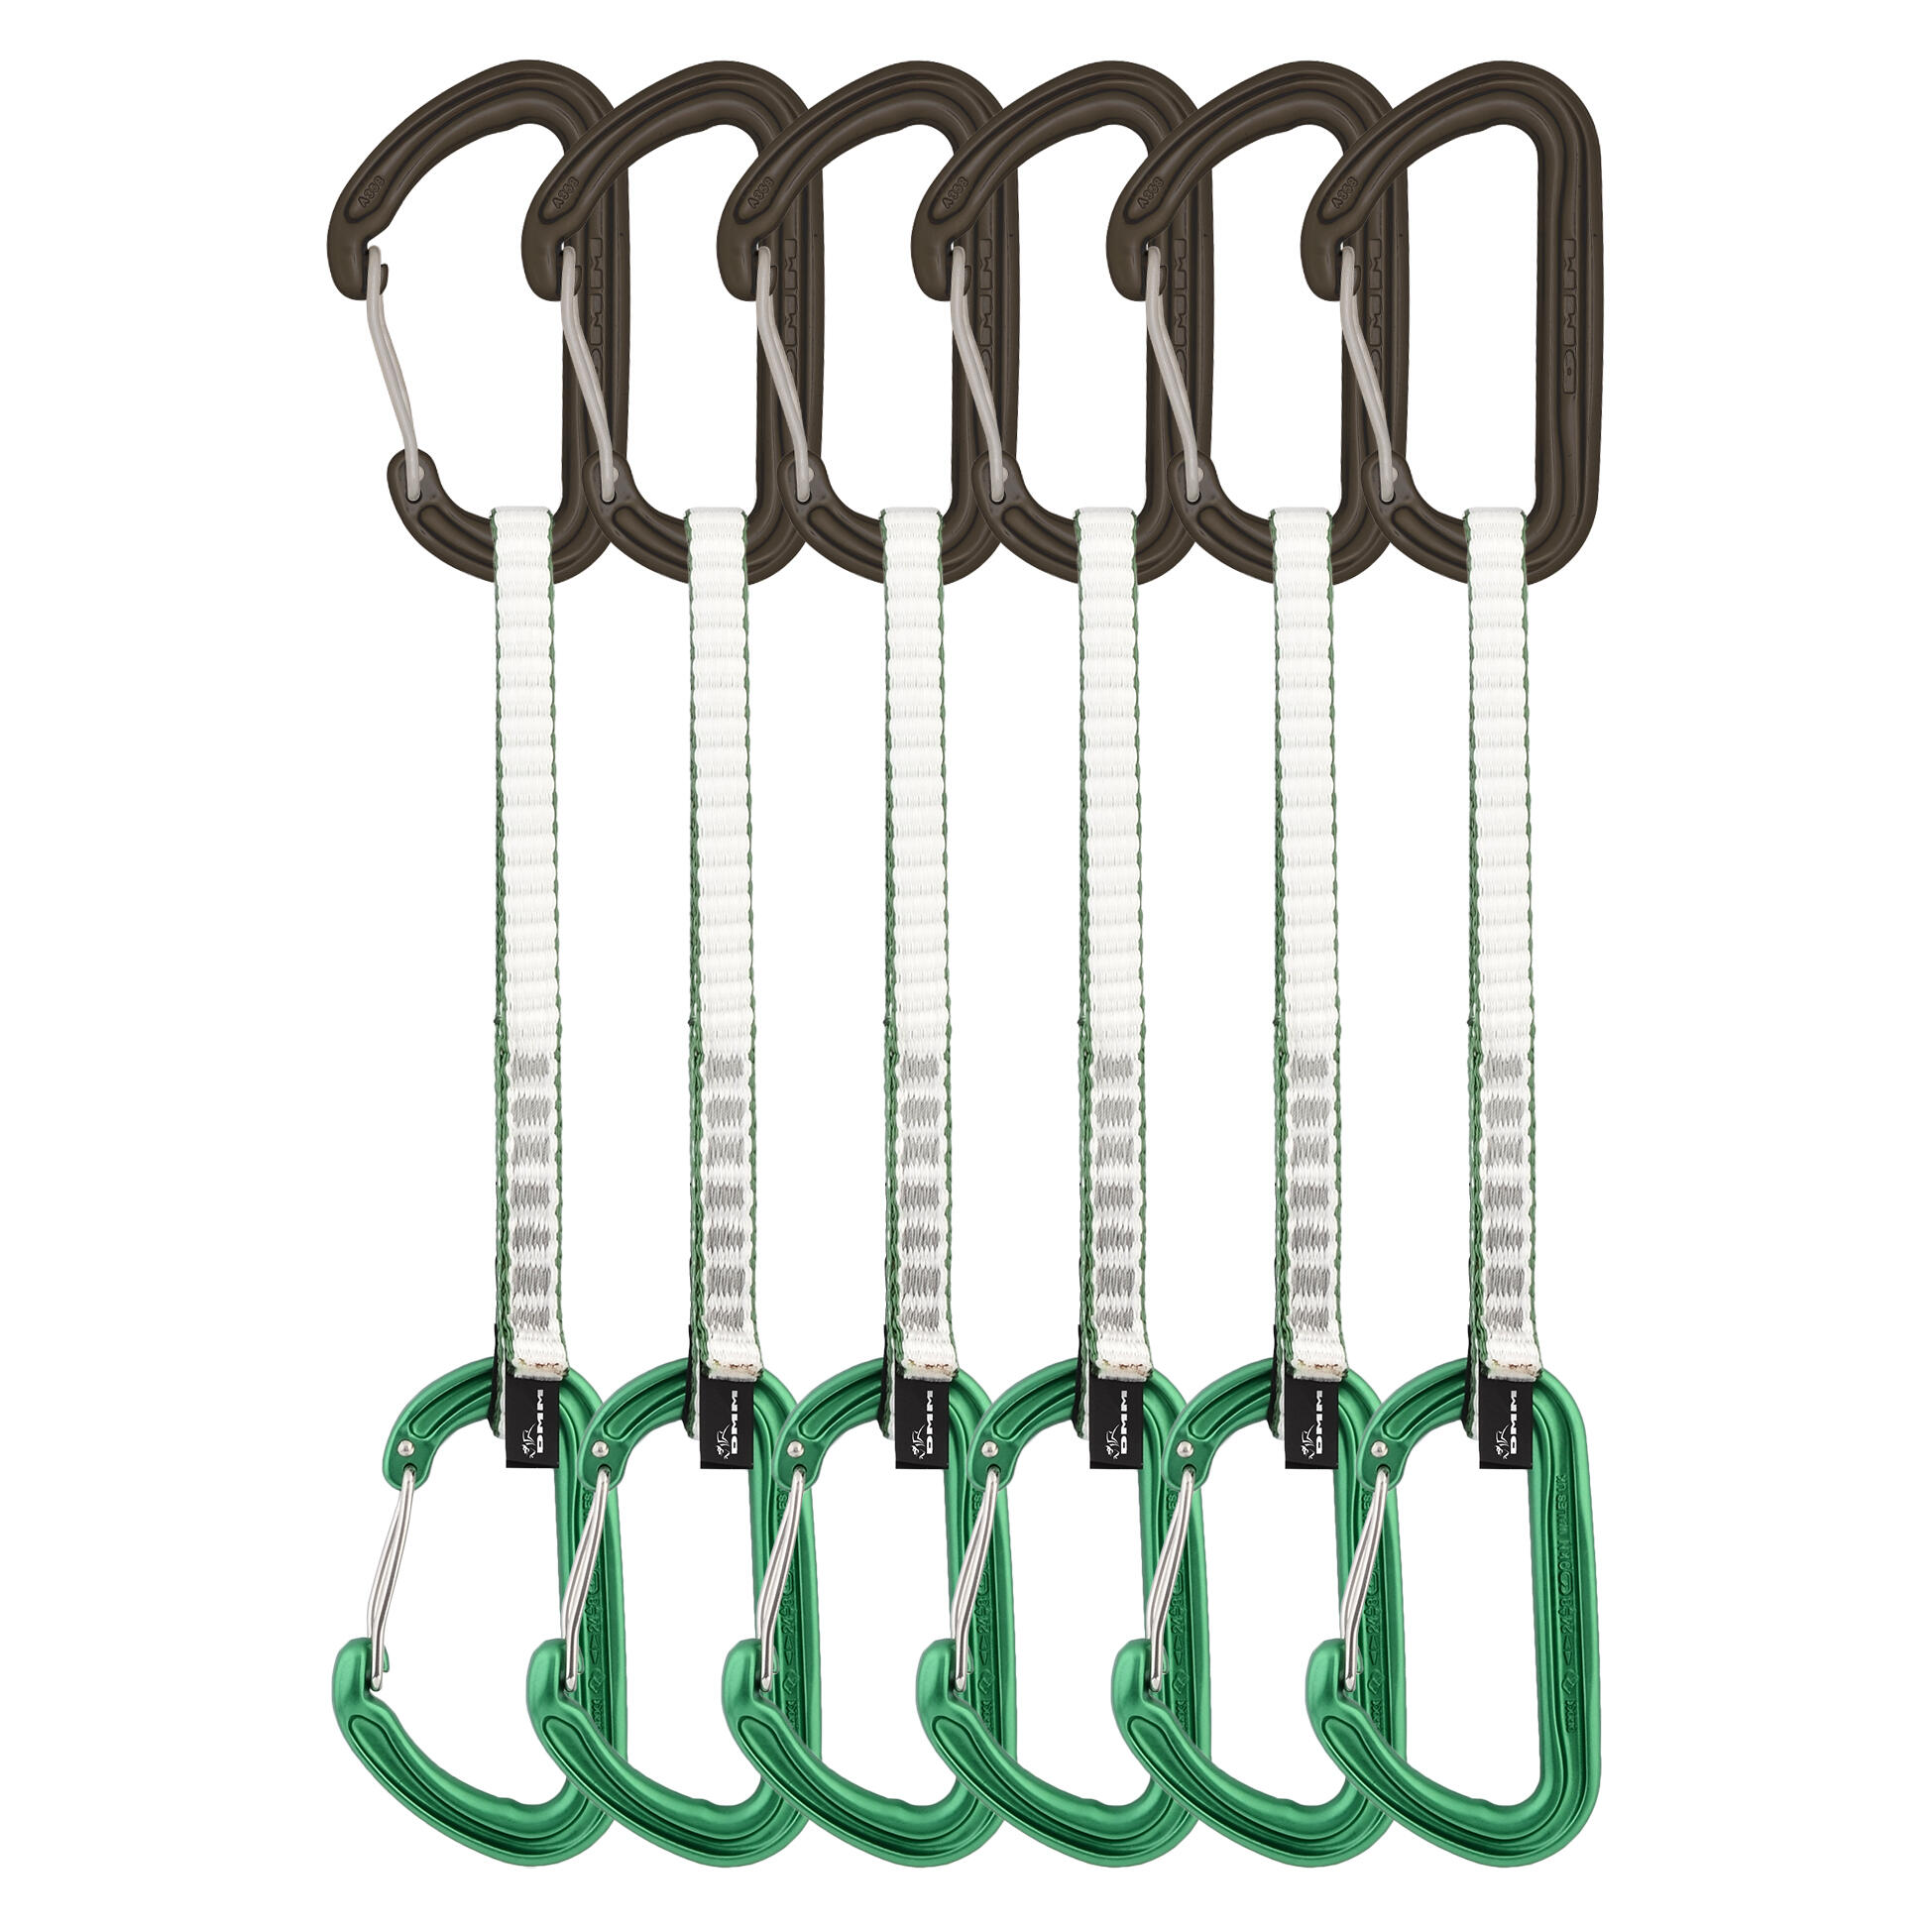 Spectre Quickdraw 18cm - Green - 6 Pack 1/3